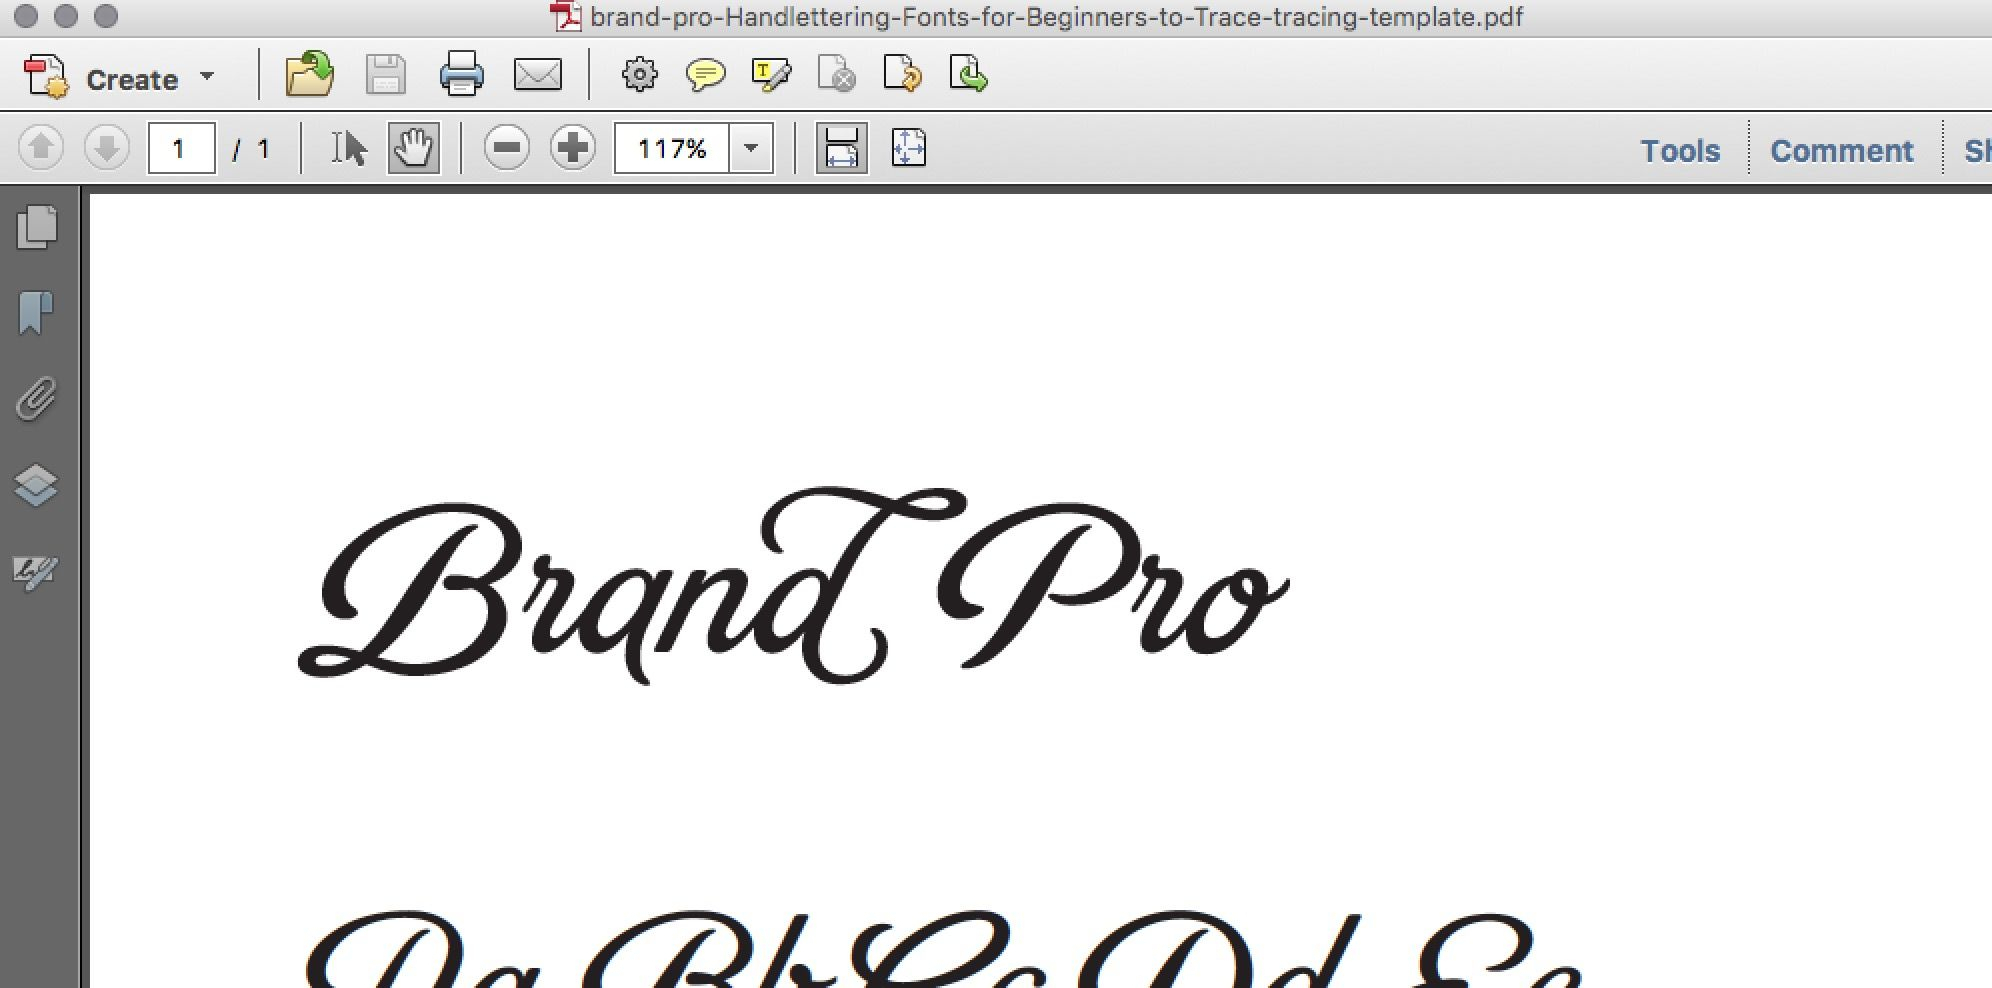 Hand-Lettering: Fonts For Beginners To Trace | Hand inside Tracing Letters In Illustrator